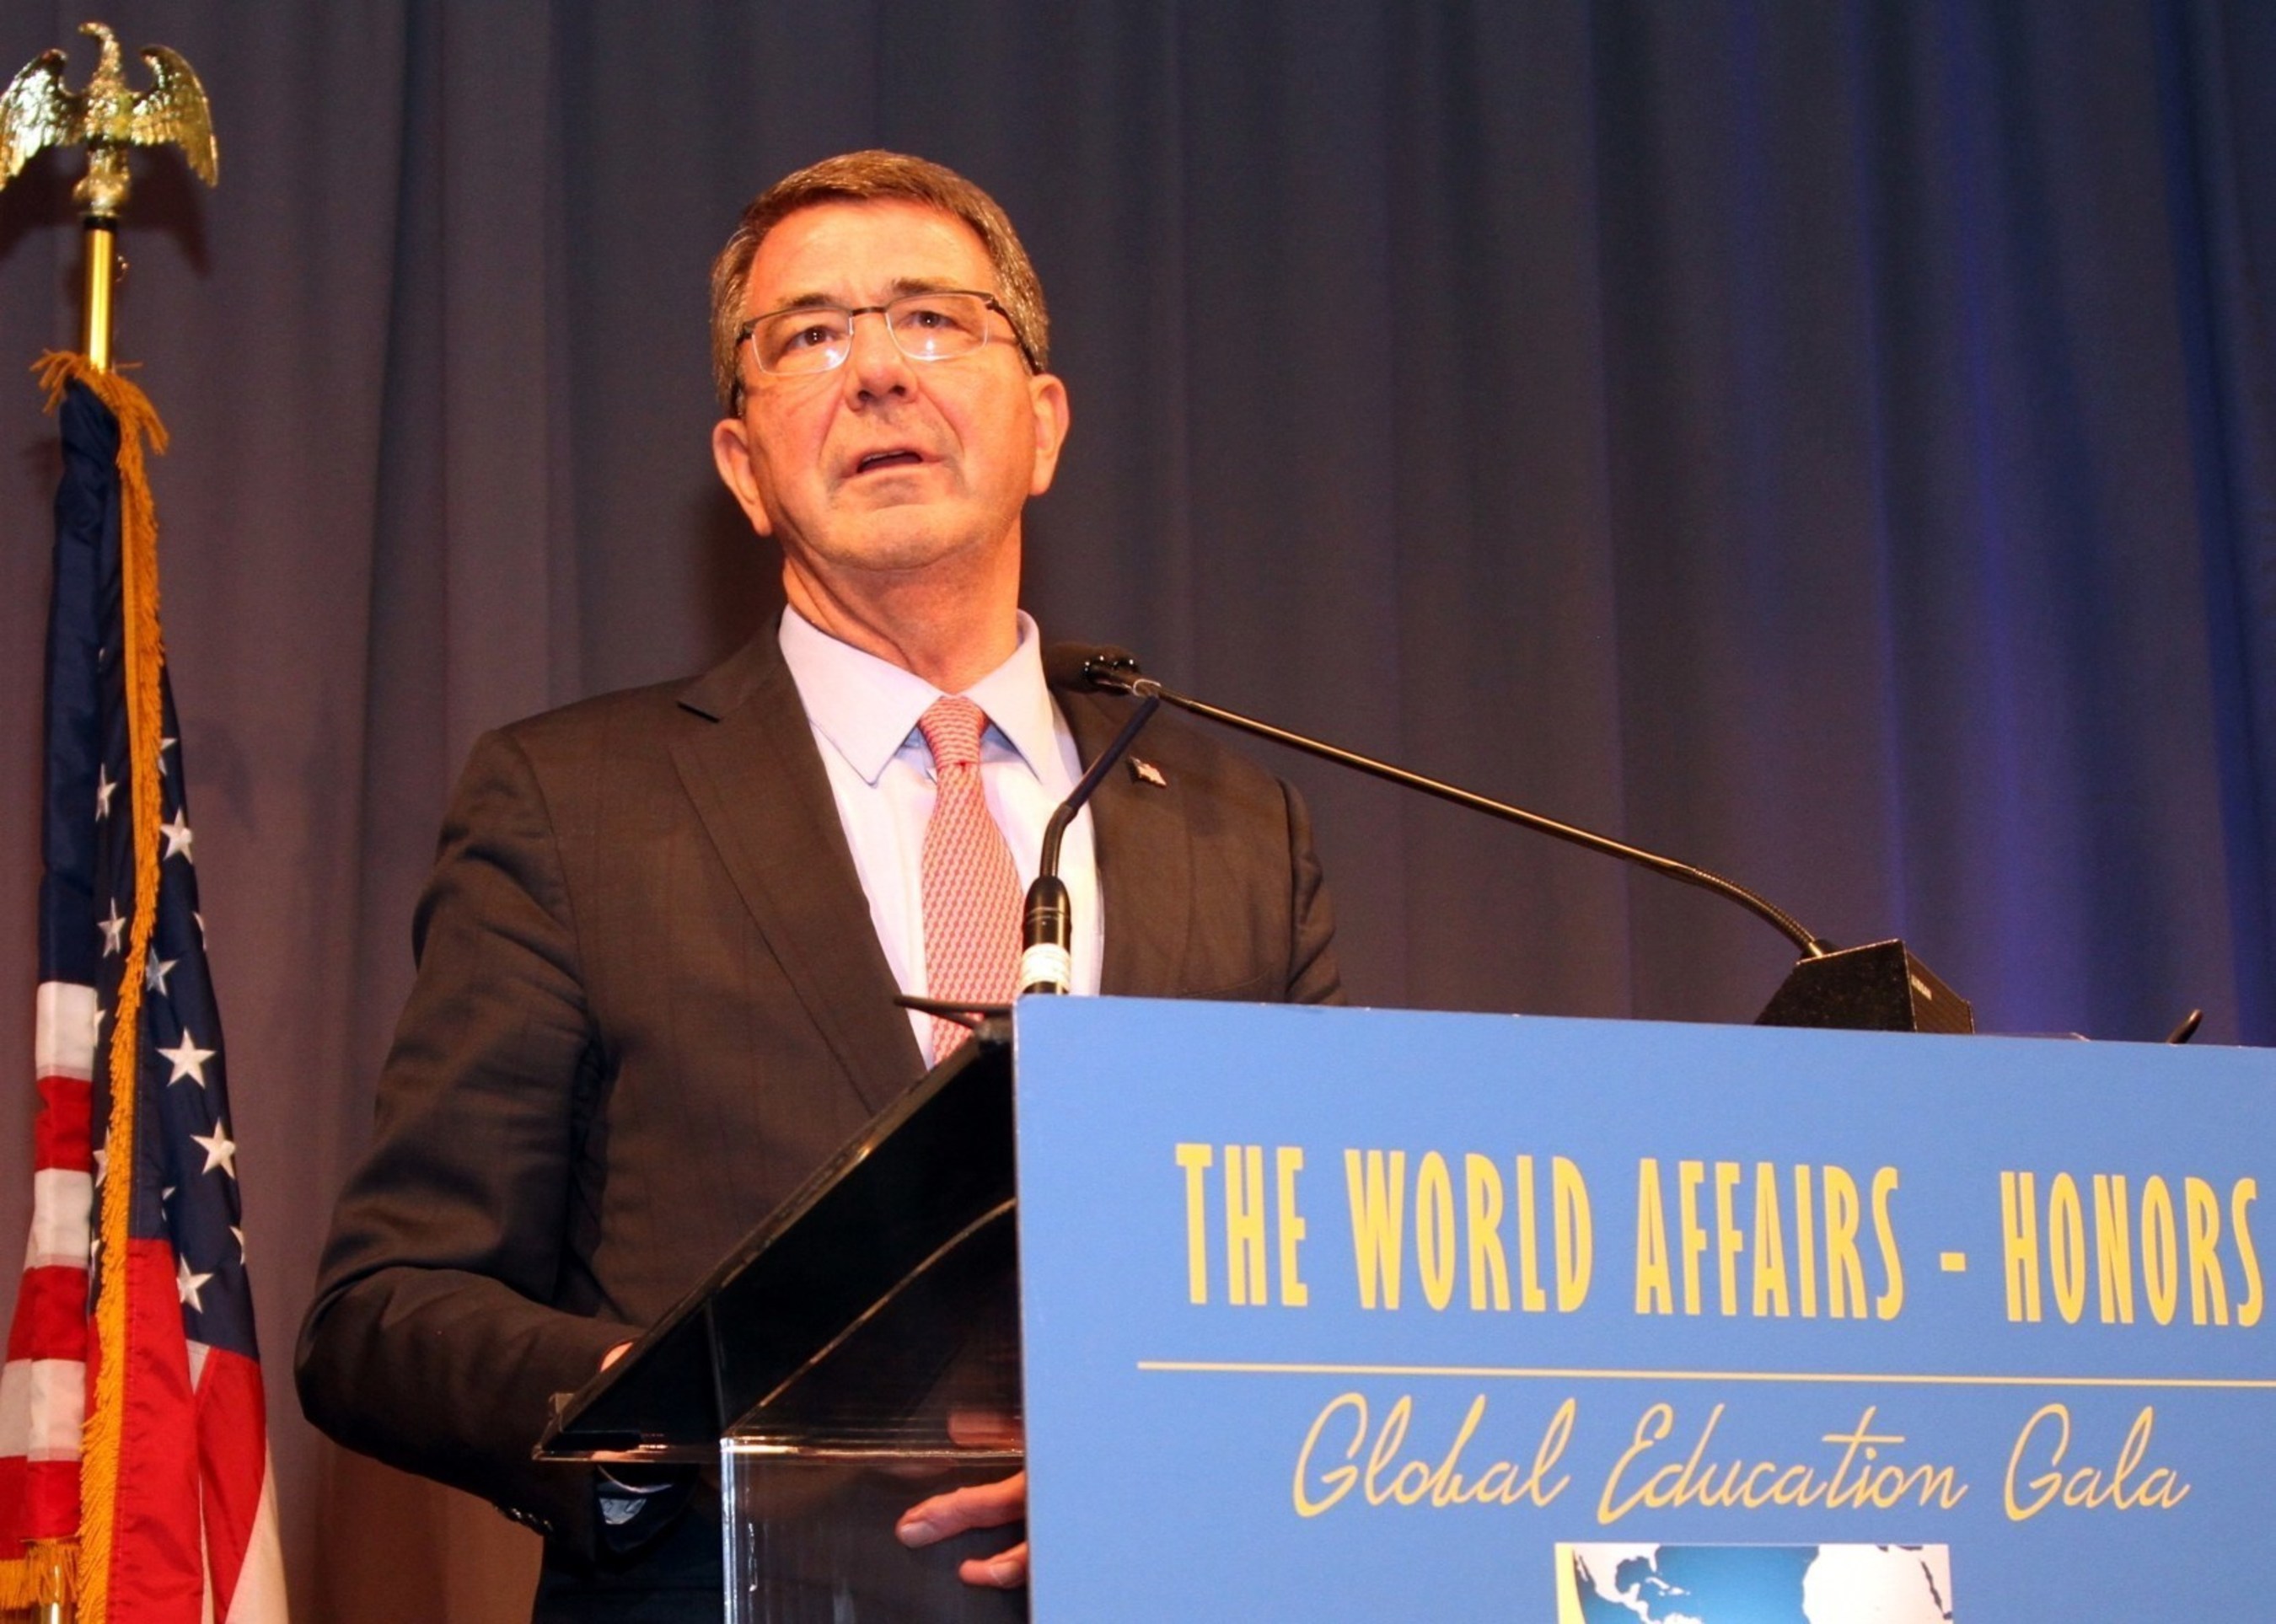 Secretary of Defense Ash Carter delivers the Keynote Address at the World Affairs HONORS: Gala on March 29. Carter was presented with the International Public Service Award at the Council's 36th Annual Gala to support Global Education. *Credit: Focused Images*